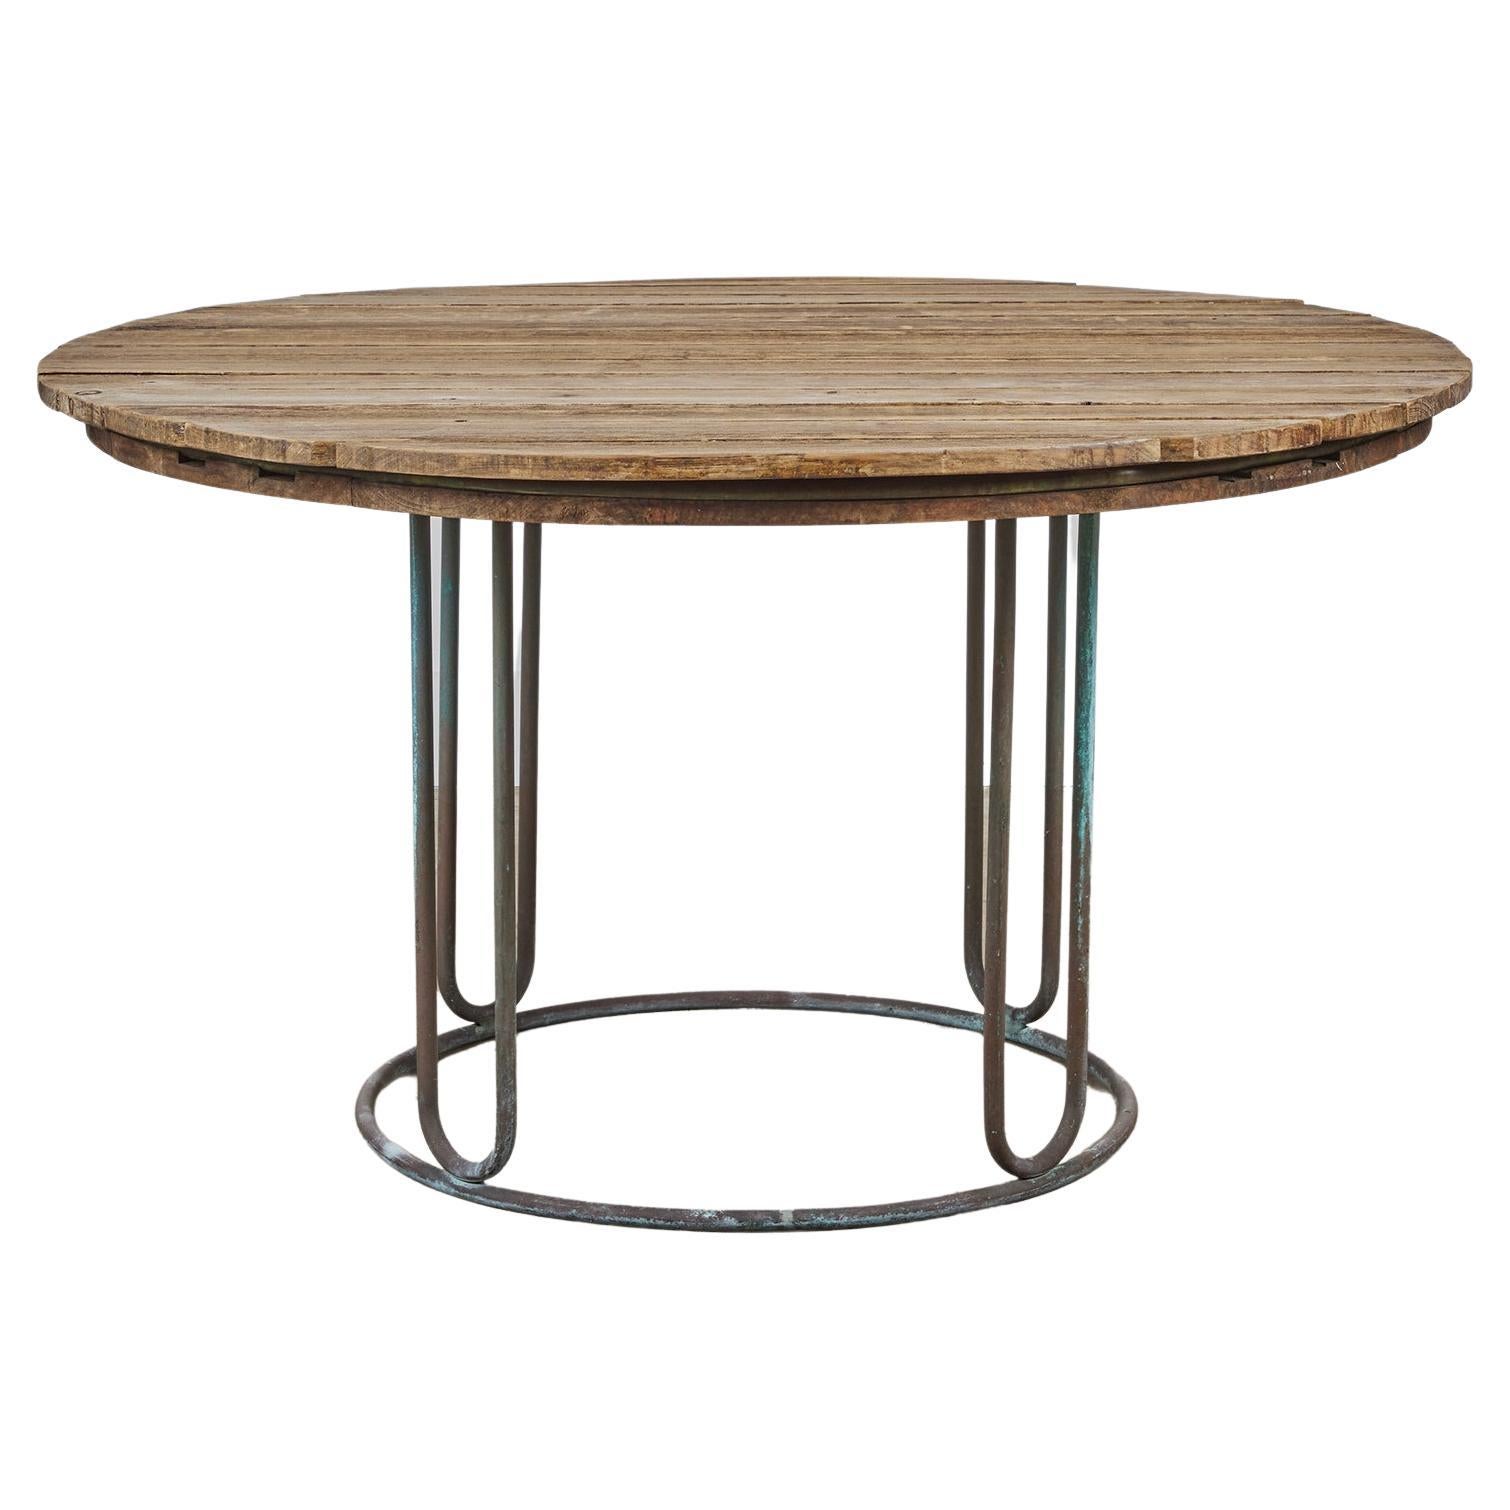 Walter Lamb for Brown Jordan Bronze Patio Dining Table with Round Wood Top For Sale